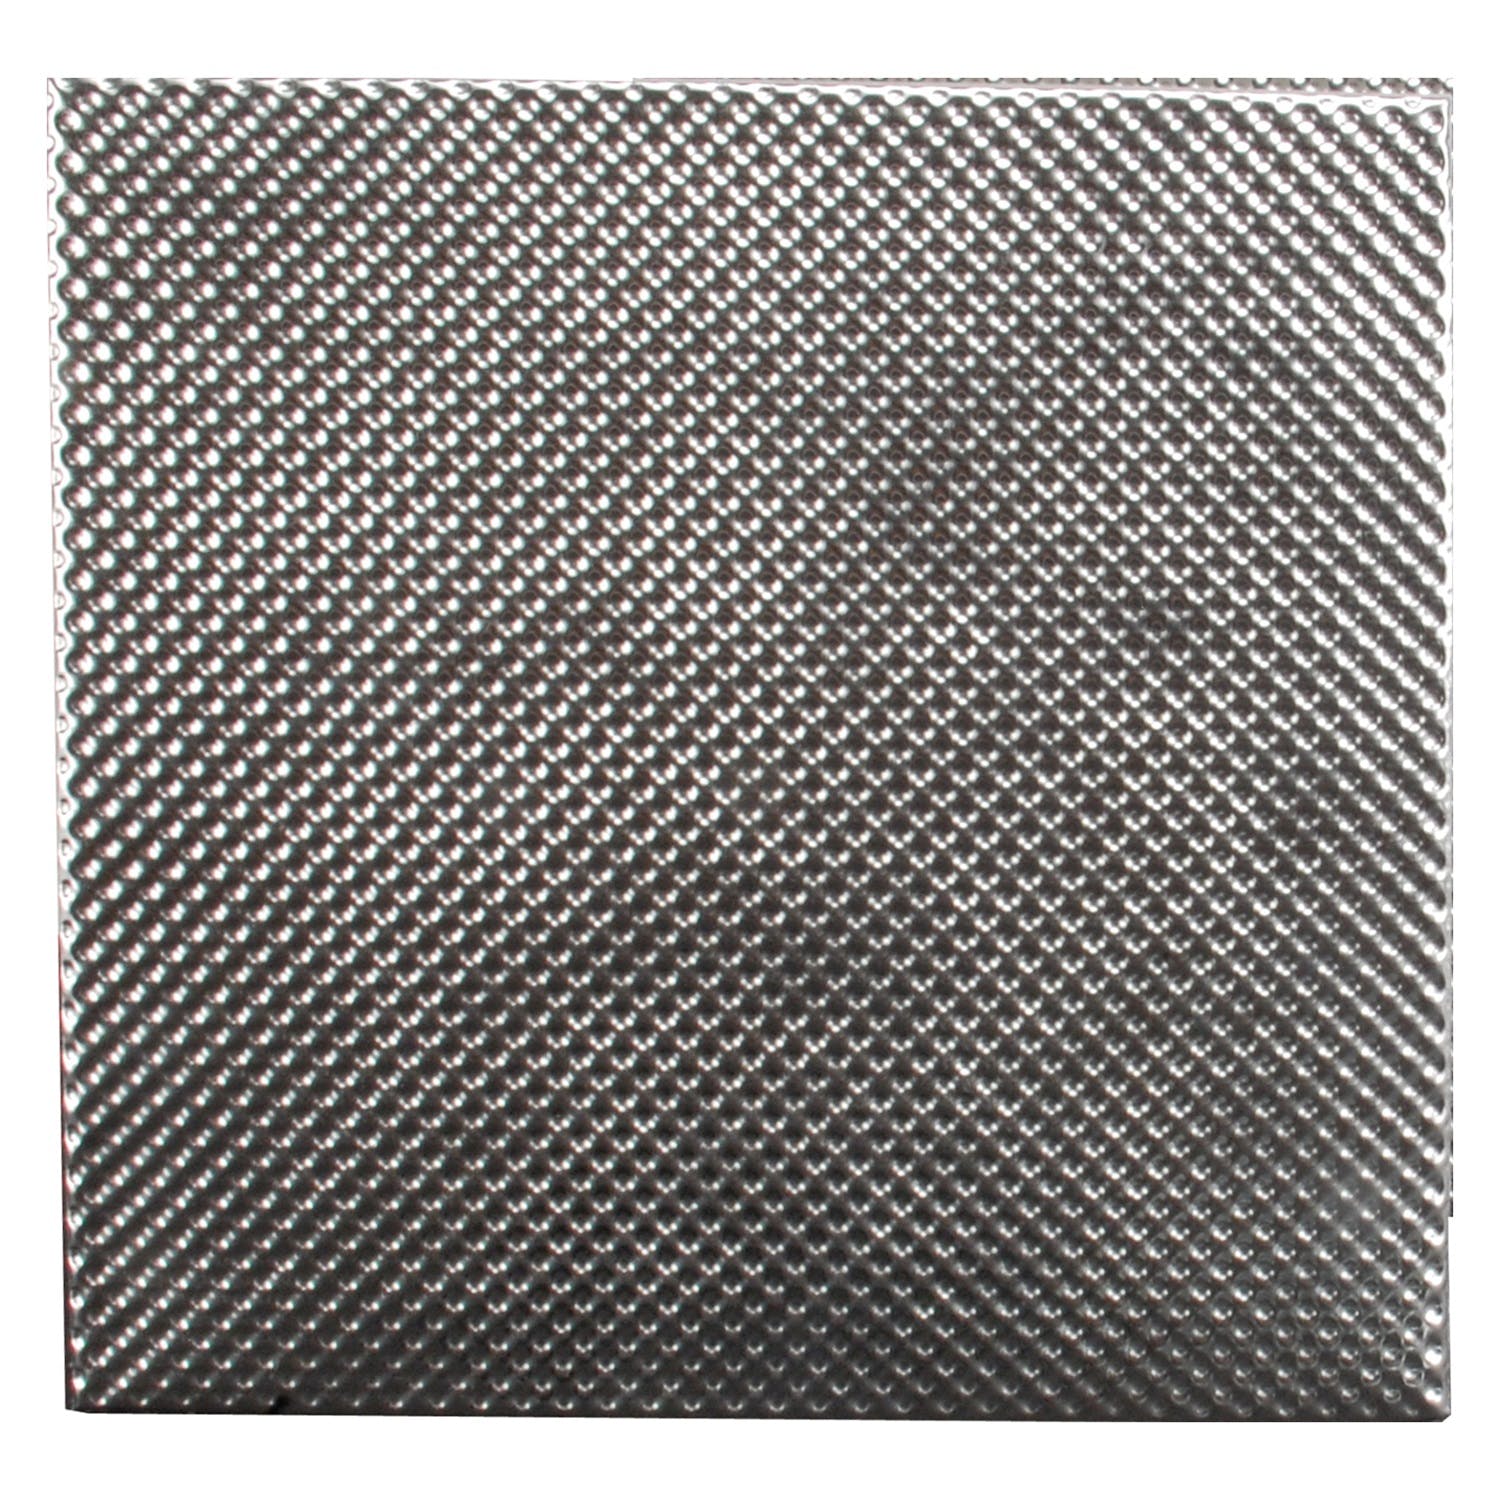 Design Engineering, Inc. 50503 Floor and Tunnel Shield - 4 ft x 42 - (14.0 square feet)